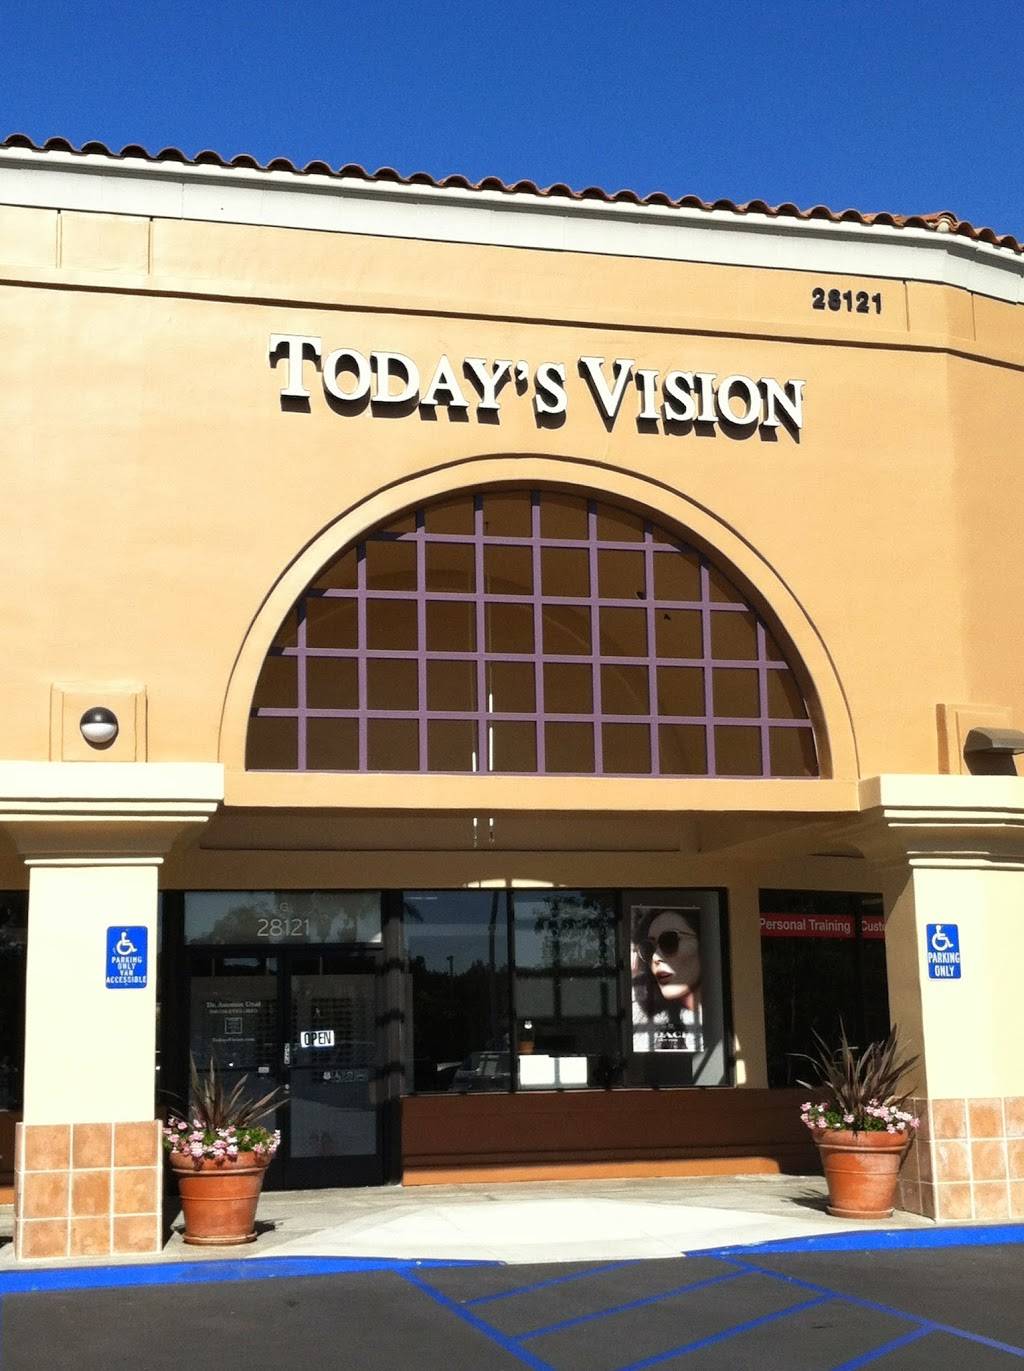 Todays Vision | 28121 Crown Valley Pkwy Suite G, Laguna Niguel, CA 92677, USA | Phone: (949) 716-3937